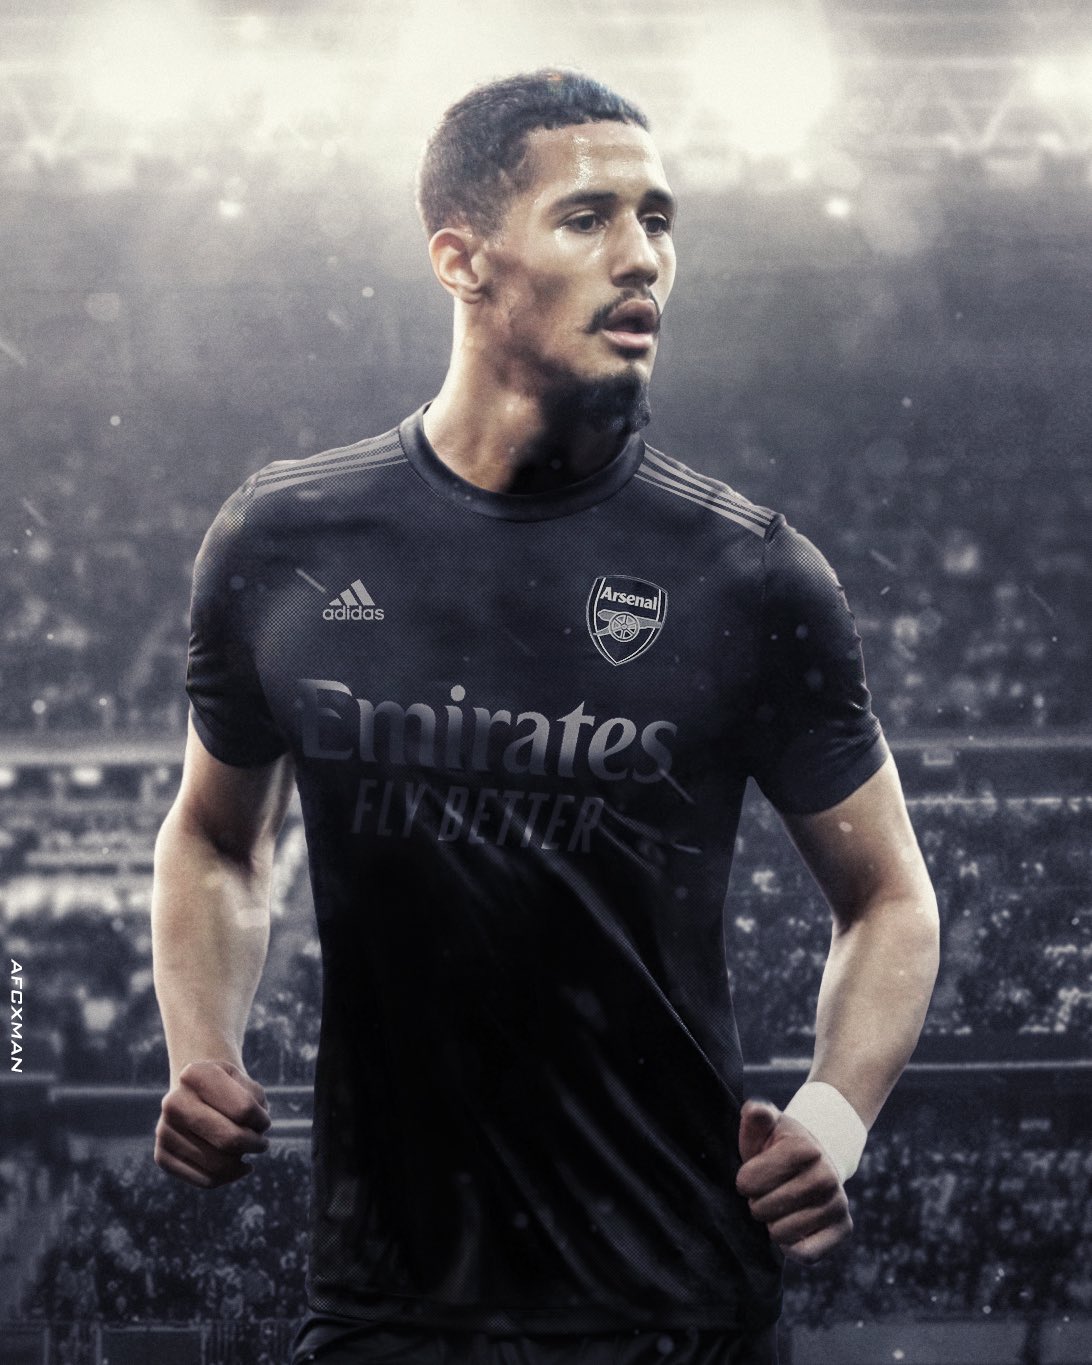 Afcstuff Of Arsenal's 'blacked Out' Away Kit For The 2022 23 Season, Manufactured By Adidas. [ #afc